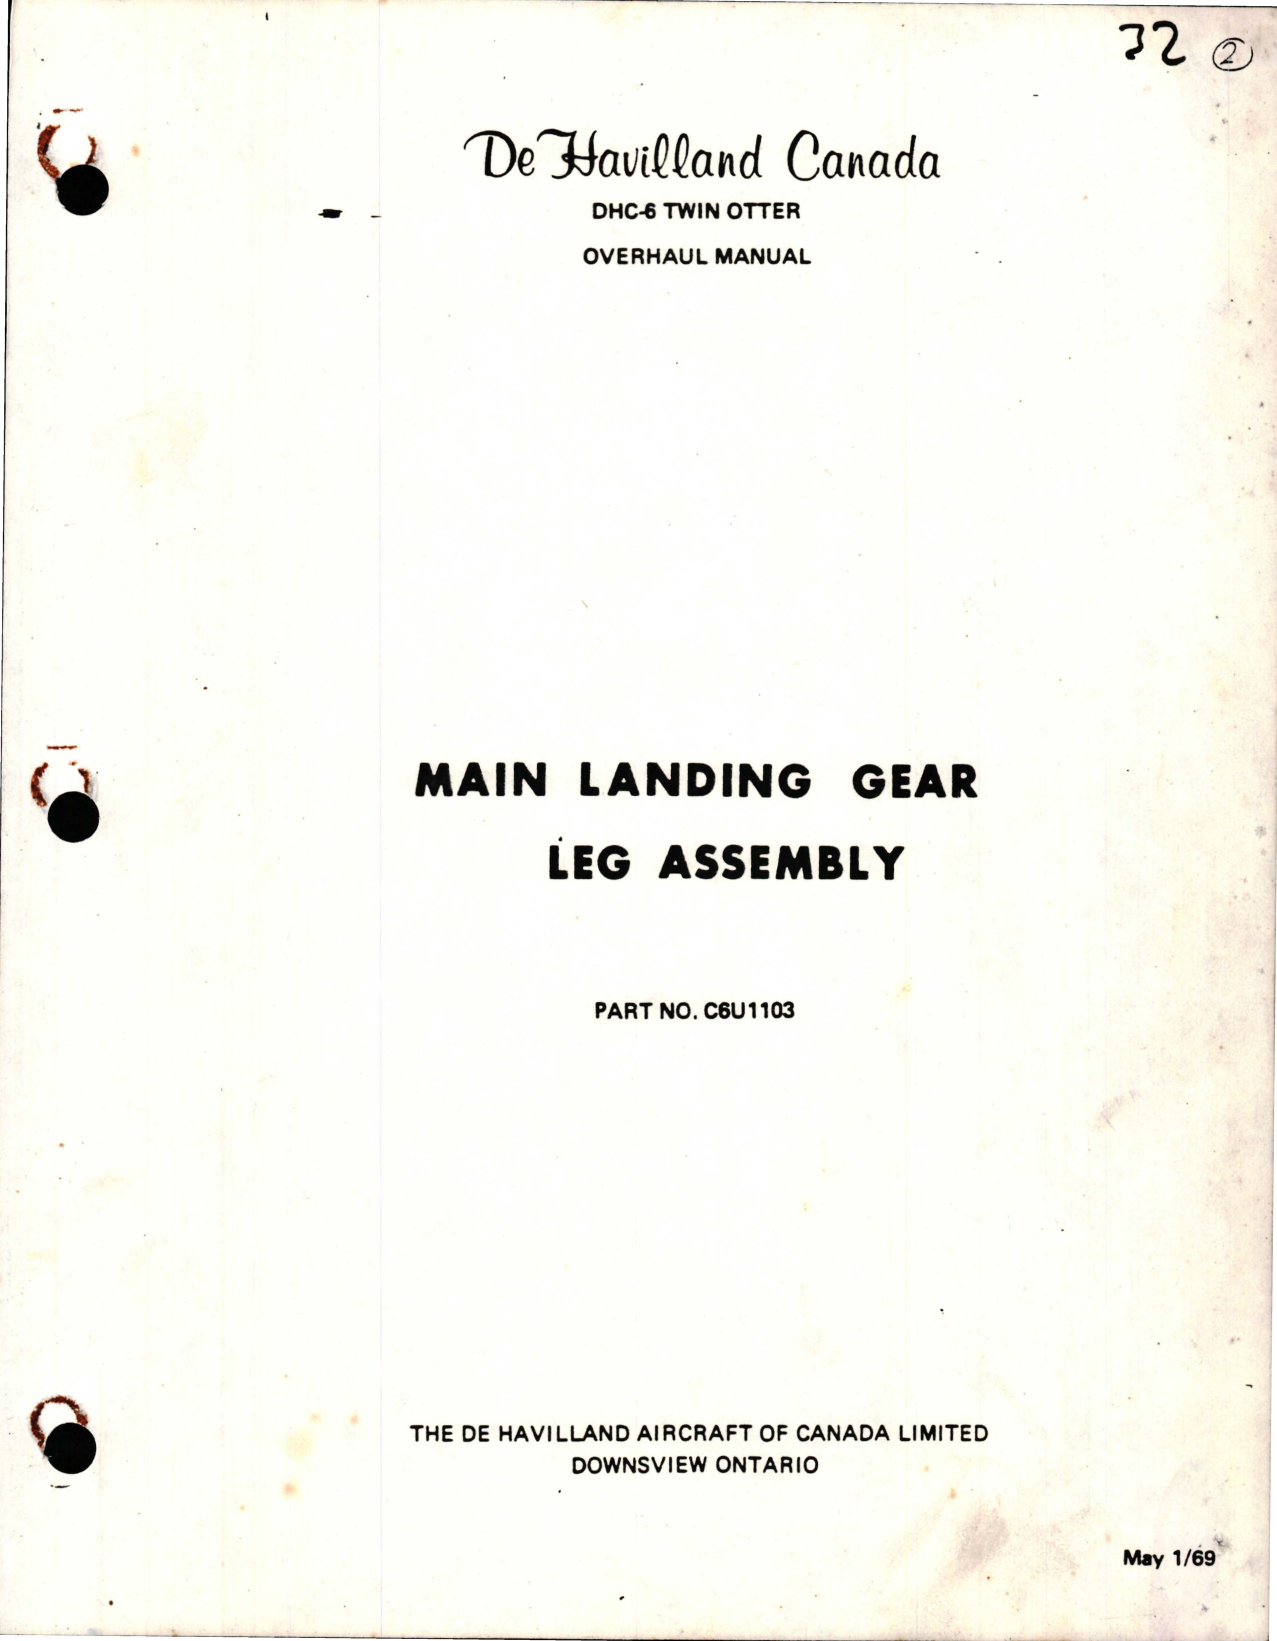 Sample page 1 from AirCorps Library document: Overhaul Manual for Main Landing Gear Leg Assembly for DHC-6 Twin Otter - Part C6U1103